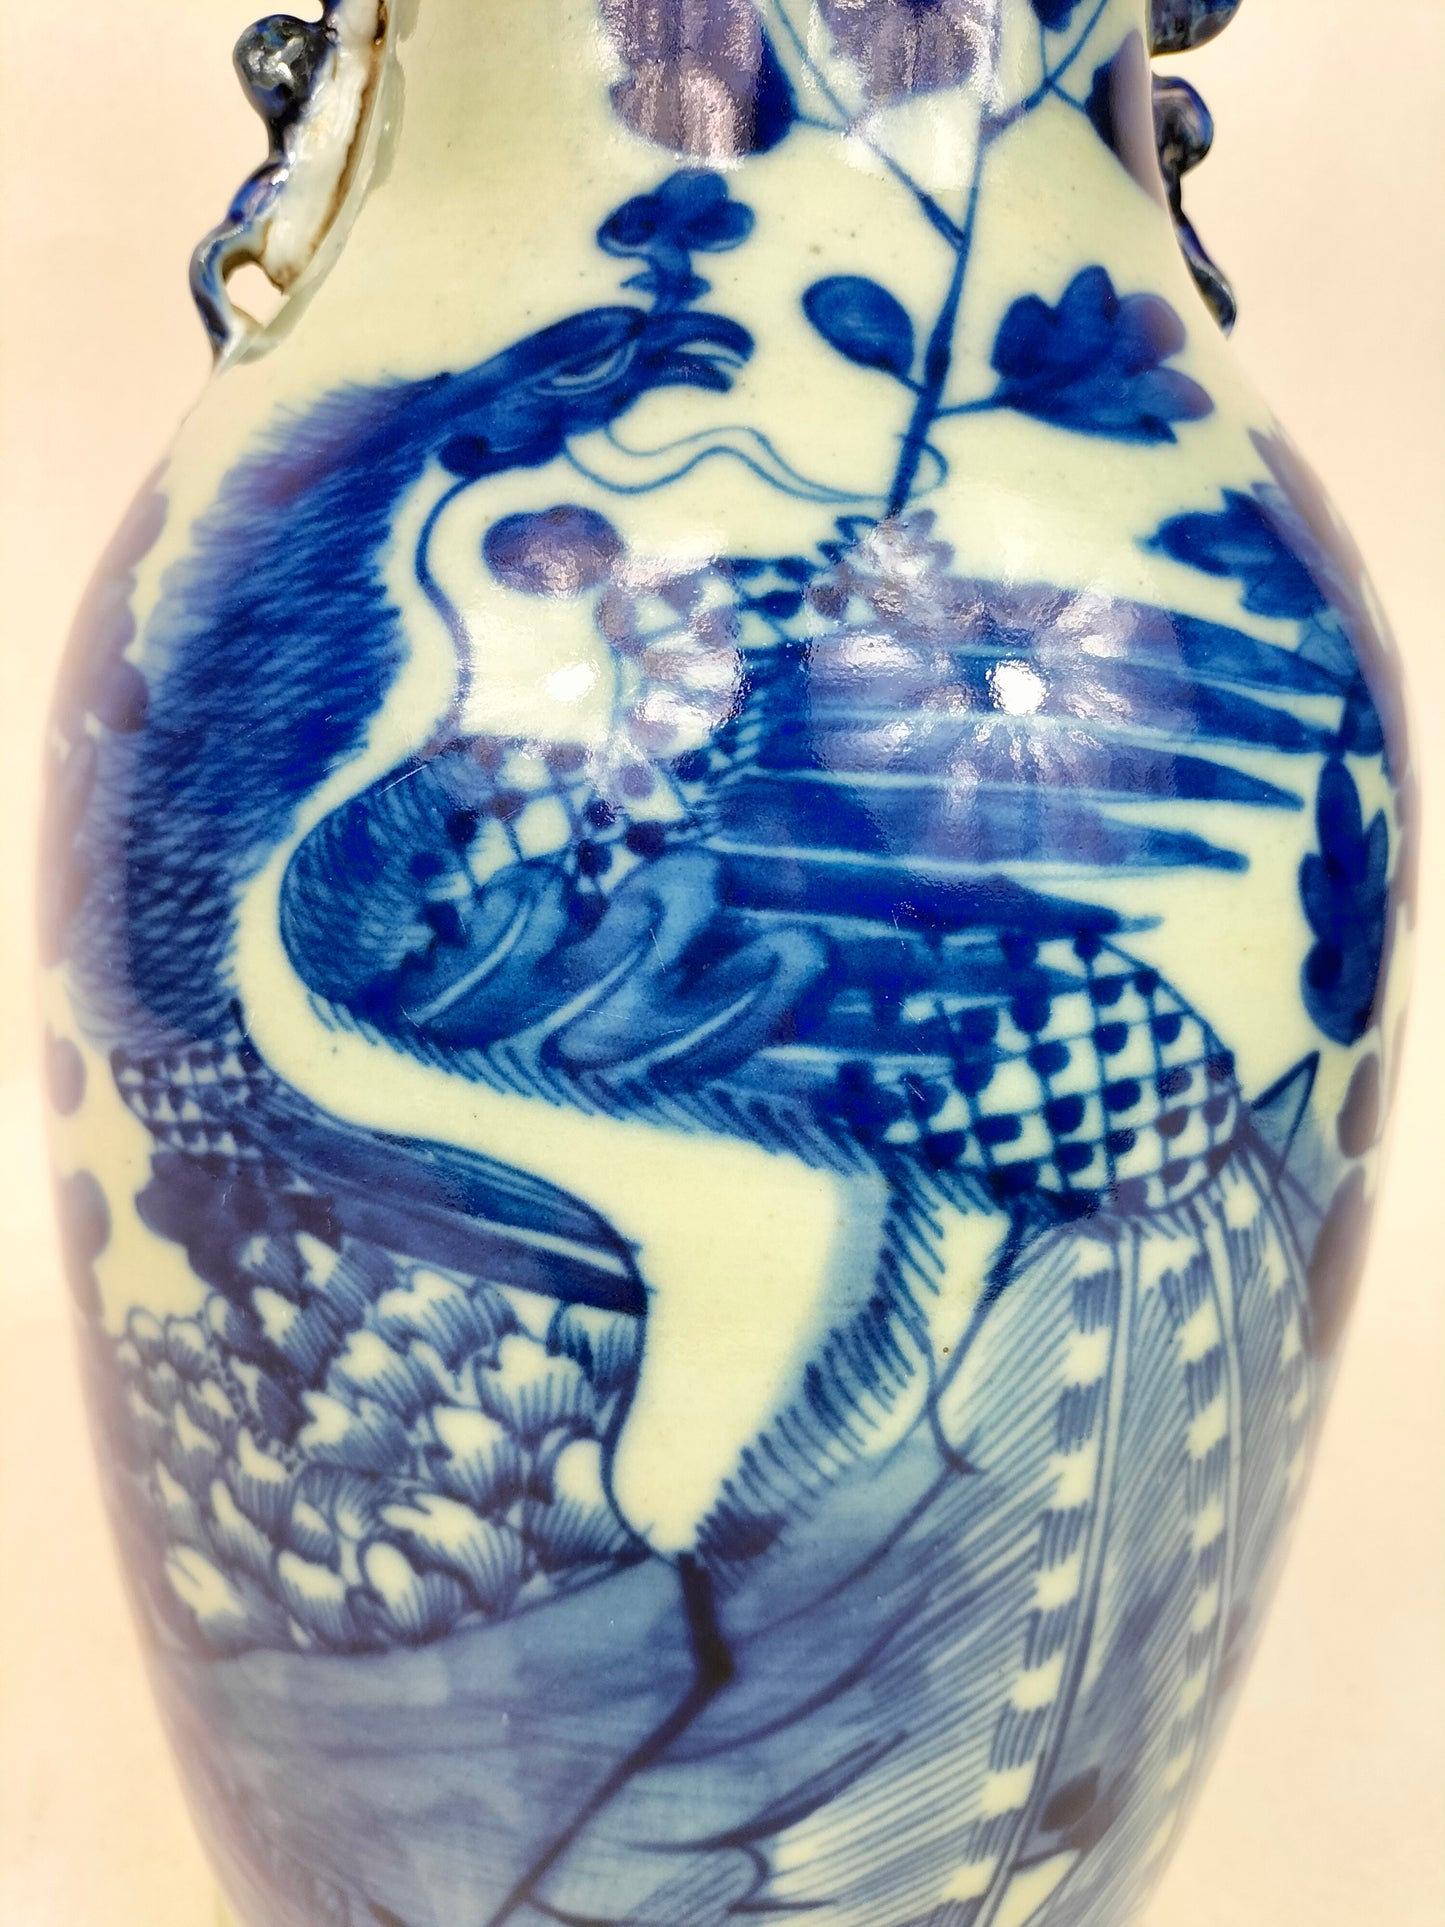 Antique Chinese celadon vase decorated with bird and flowers // Qing Dynasty - 19th century